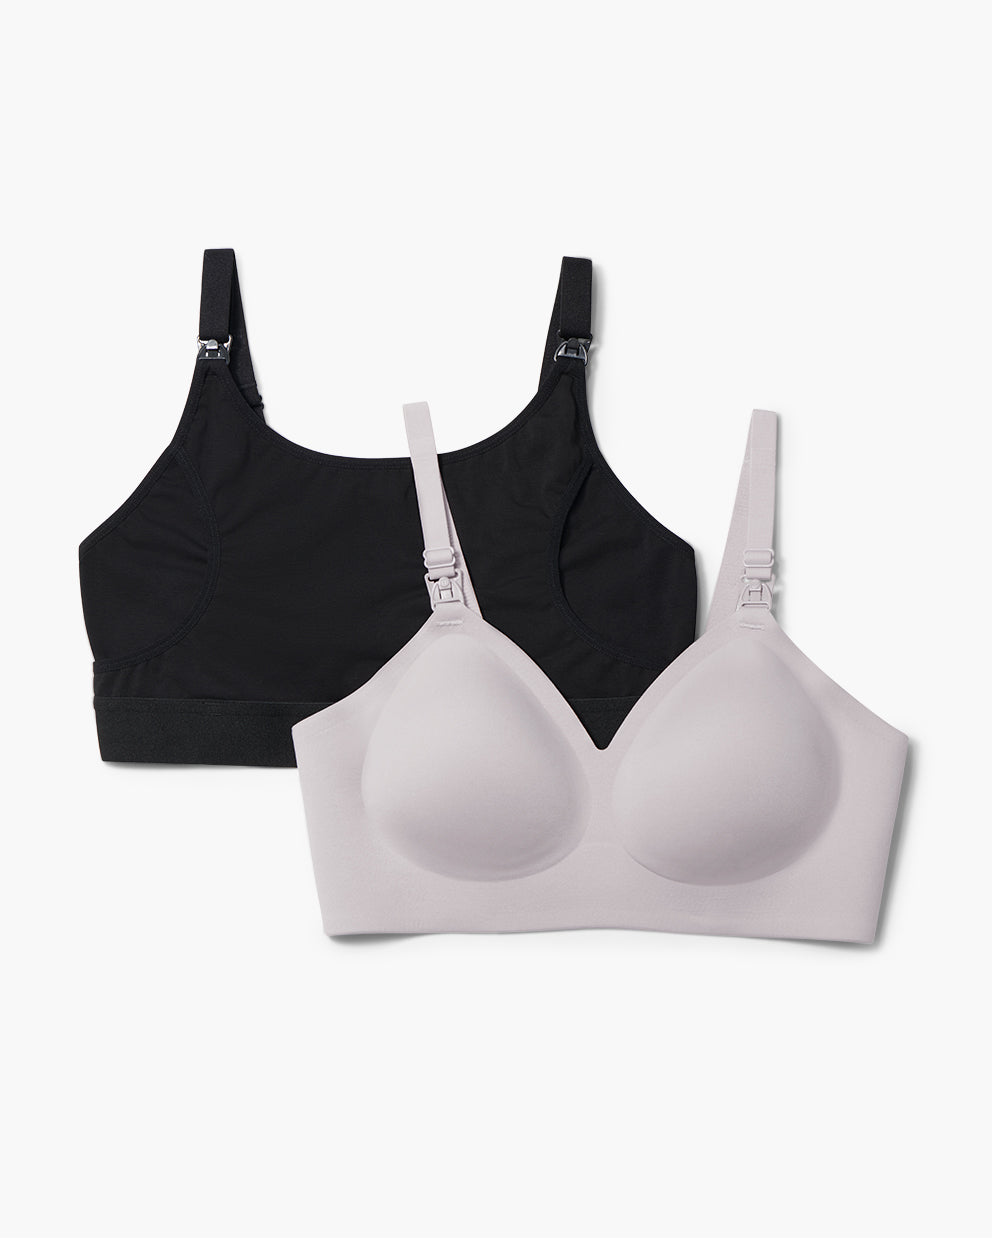 Momcozy on X: No matter what you're looking for in a nursing bra